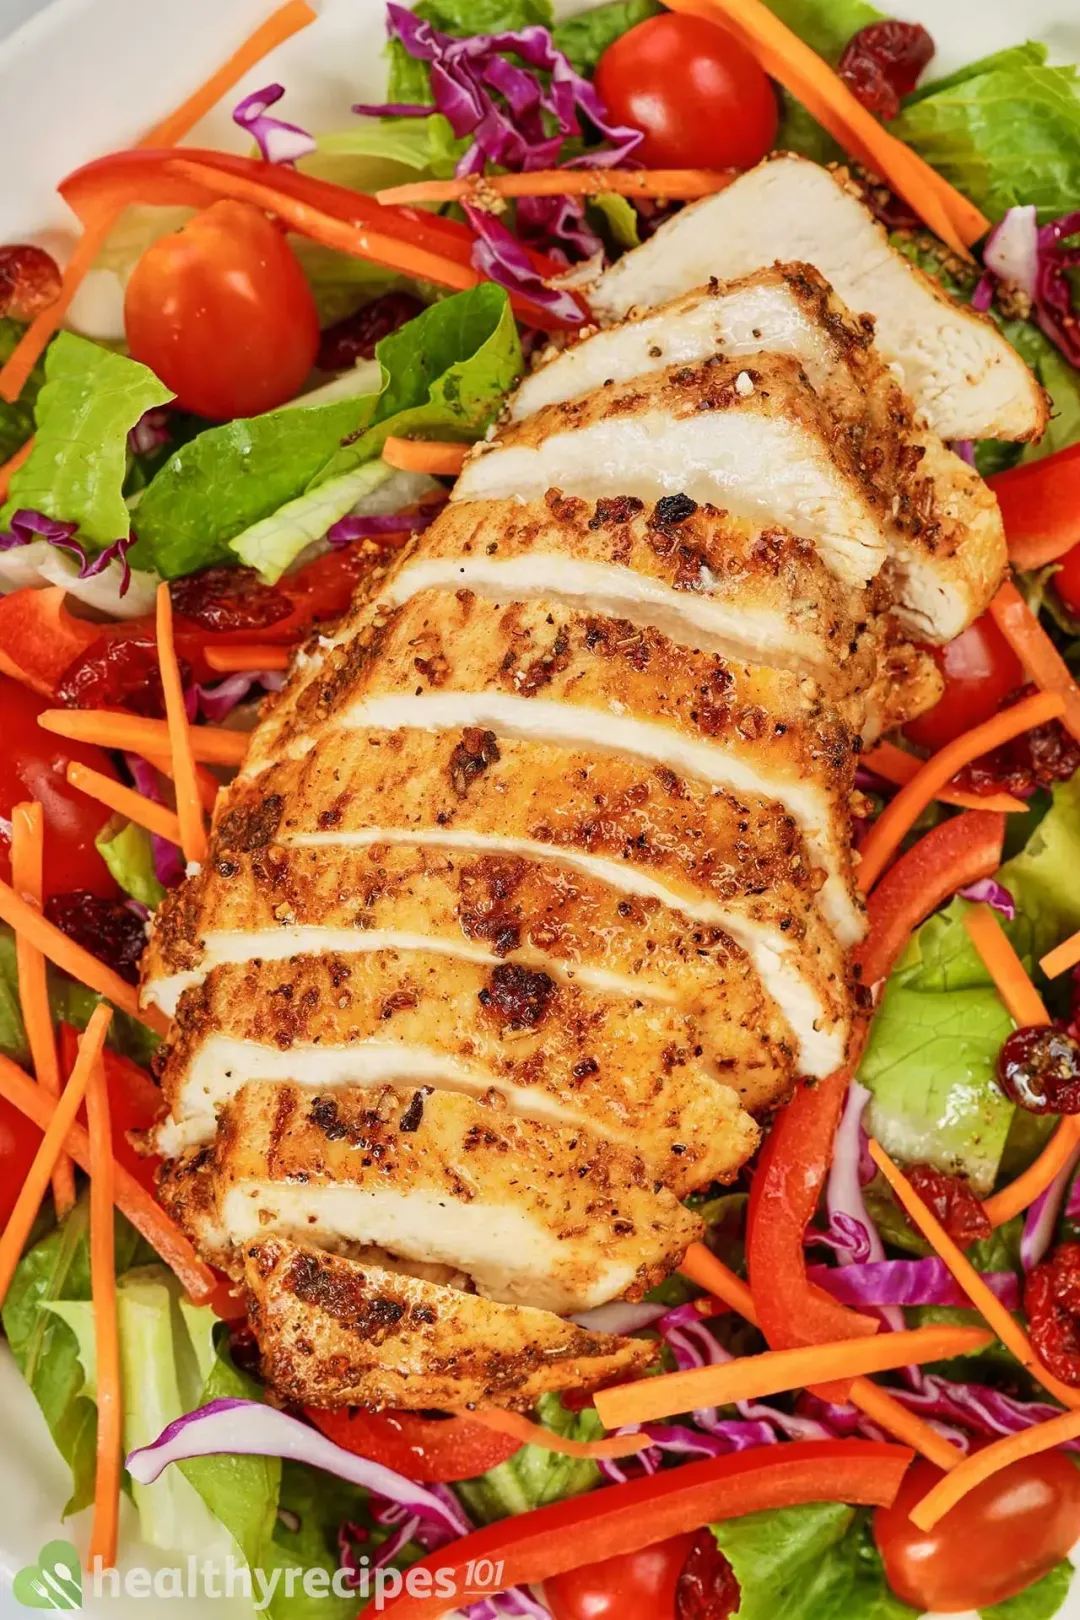 Is This Air Fryer Chicken Salad Recipe Healthy